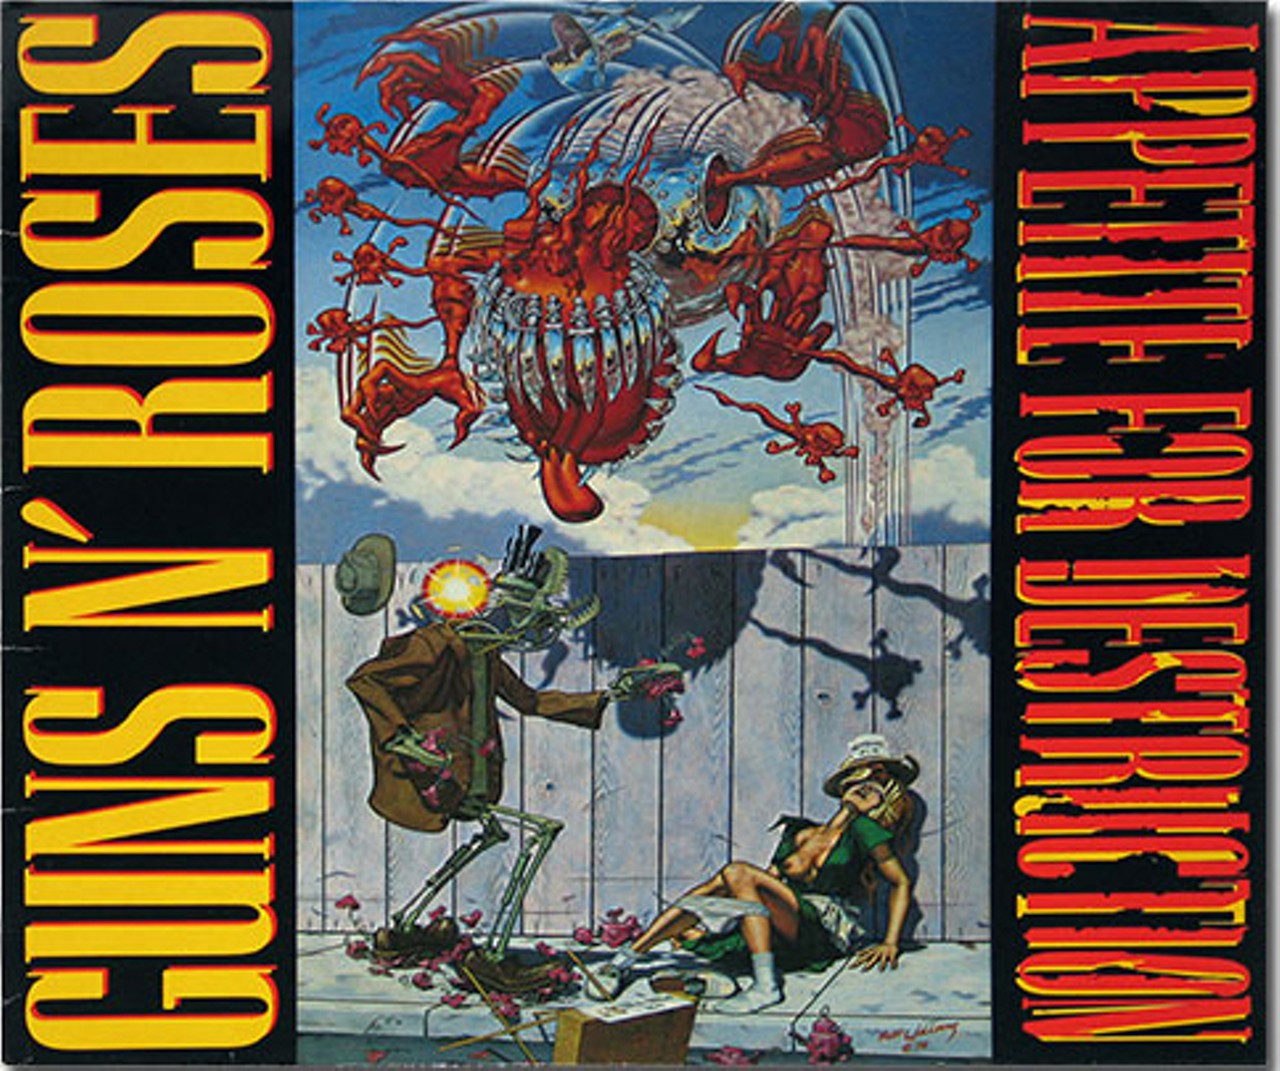 18. Guns n' Roses' "Appetite for Destruction" features your classic all-American blondie waitress post-violation by a robot rapist. The cover, based on a Robert Williams painting, disturbed music retailers so much that the band had to come up with a new, much less jarring cover.